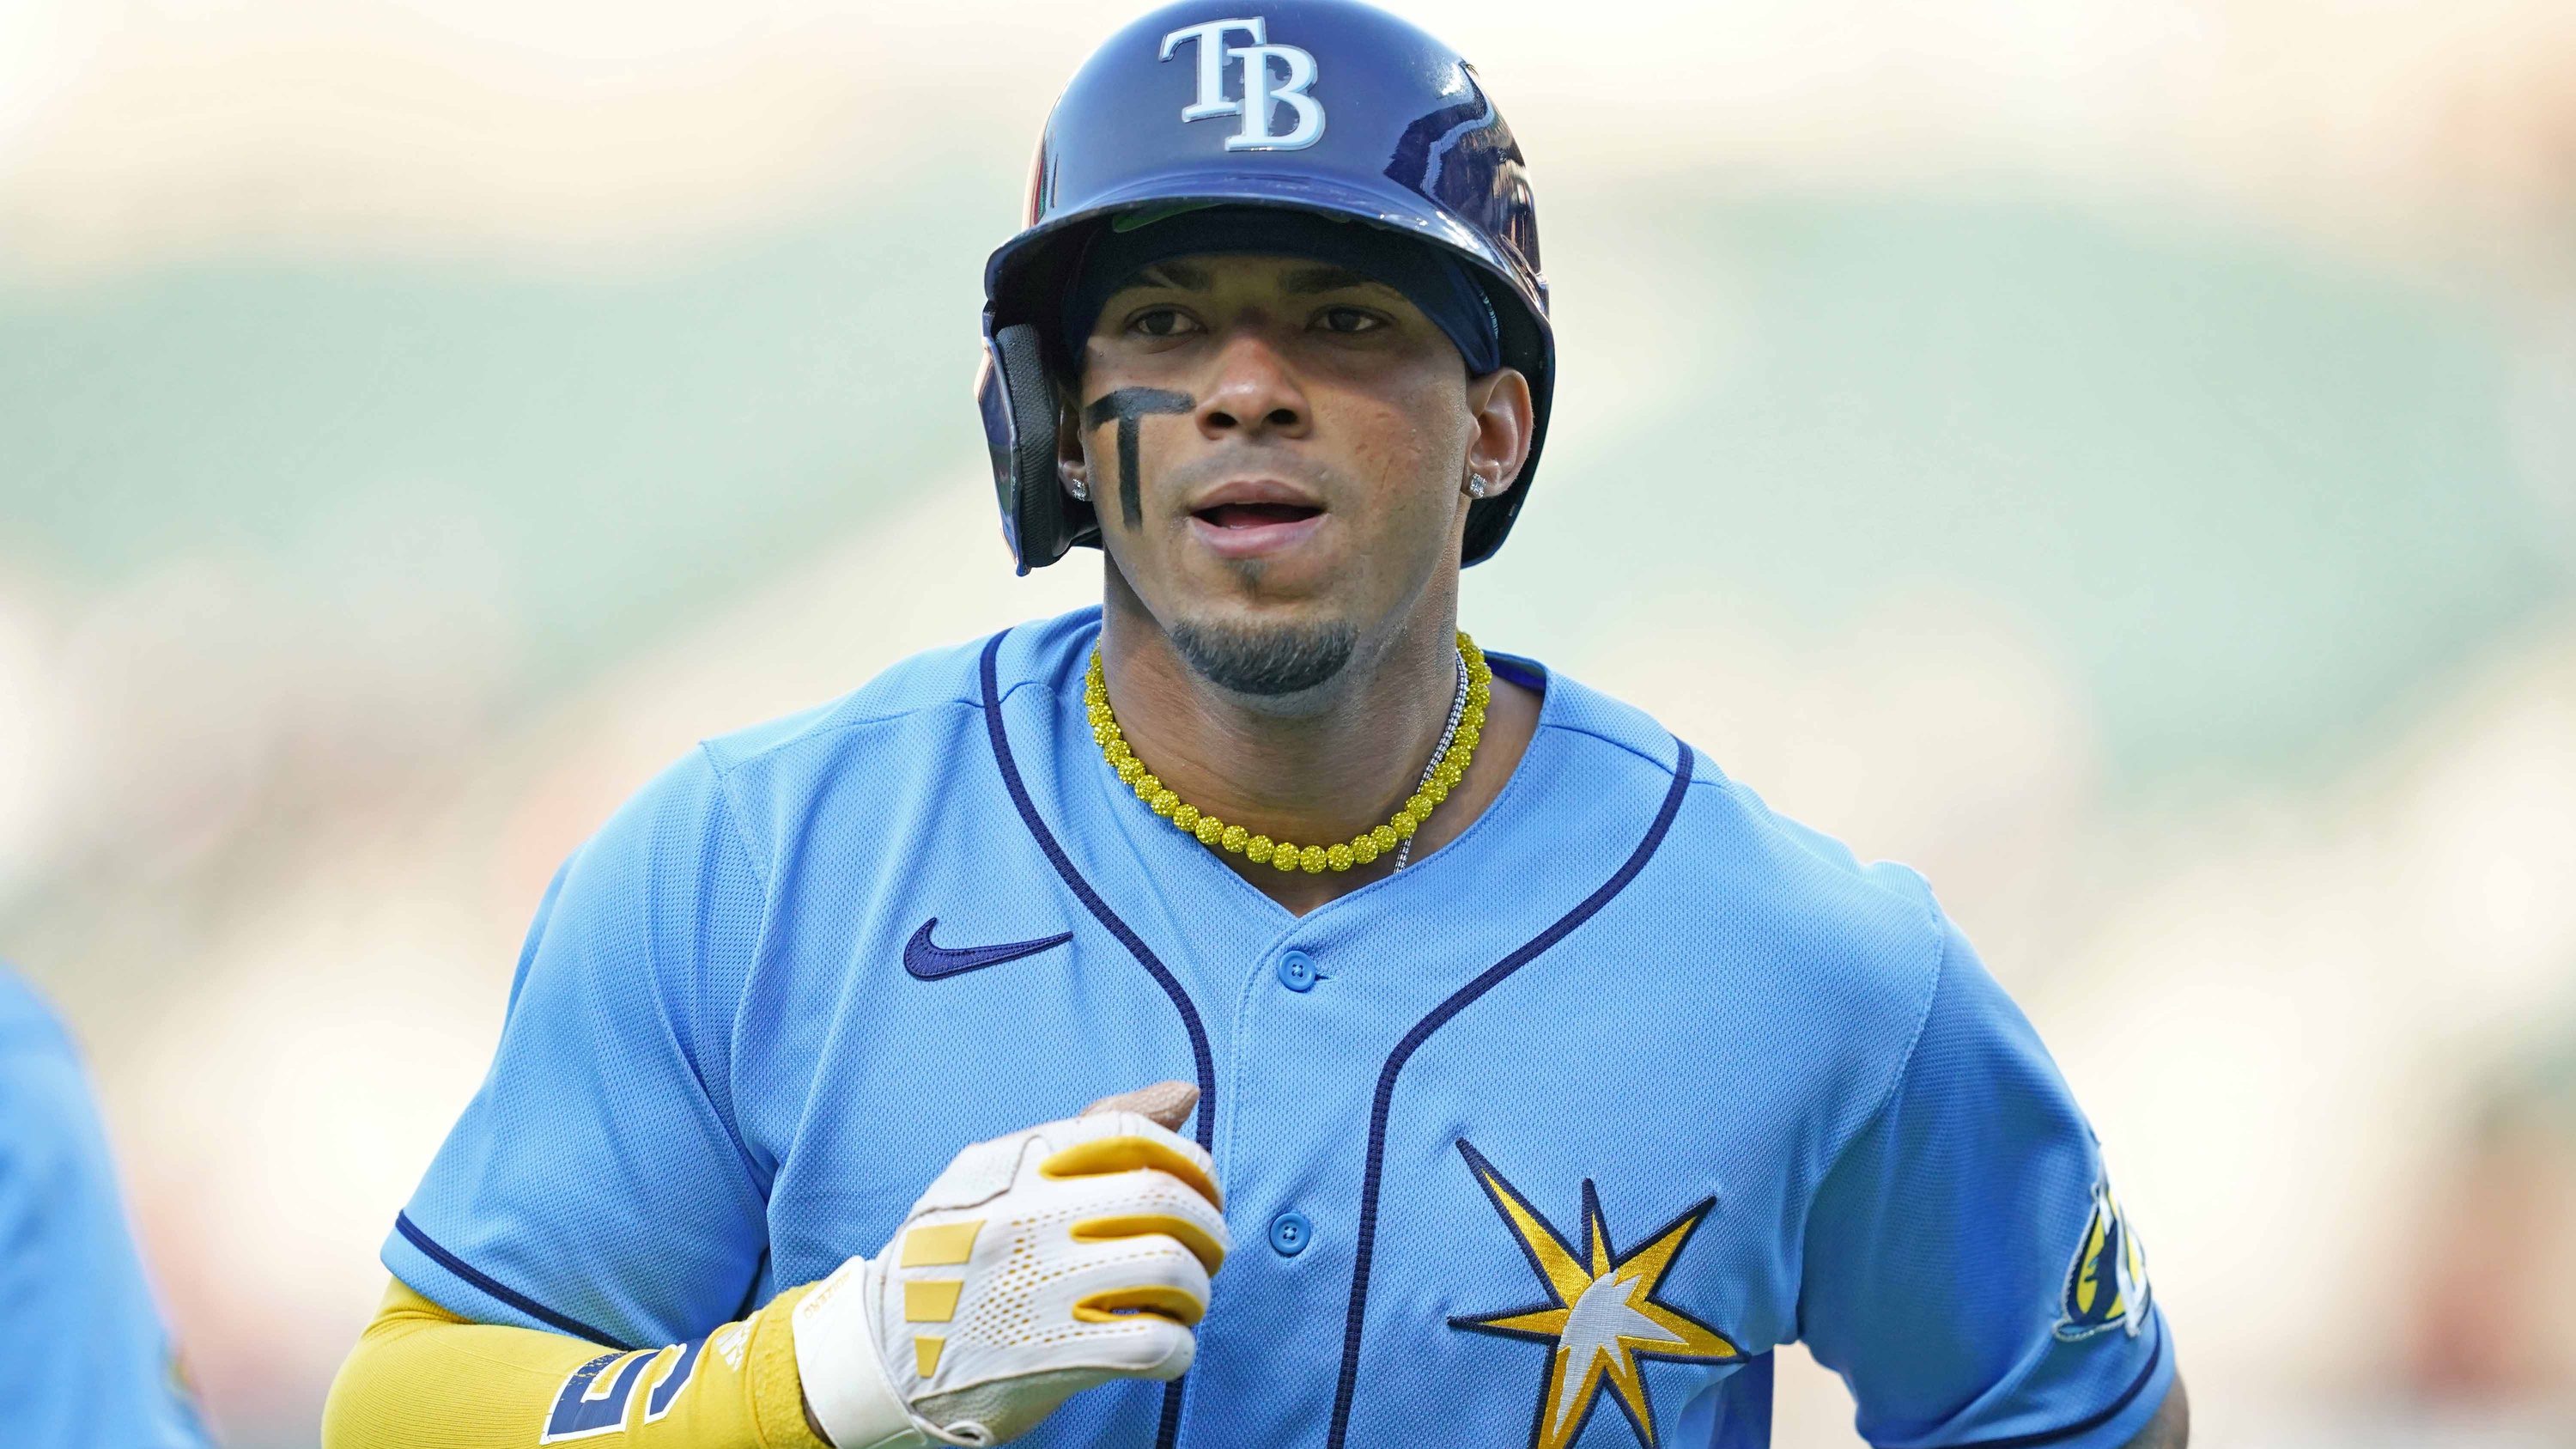 Franco signs $182-million, 11-year contract with Rays